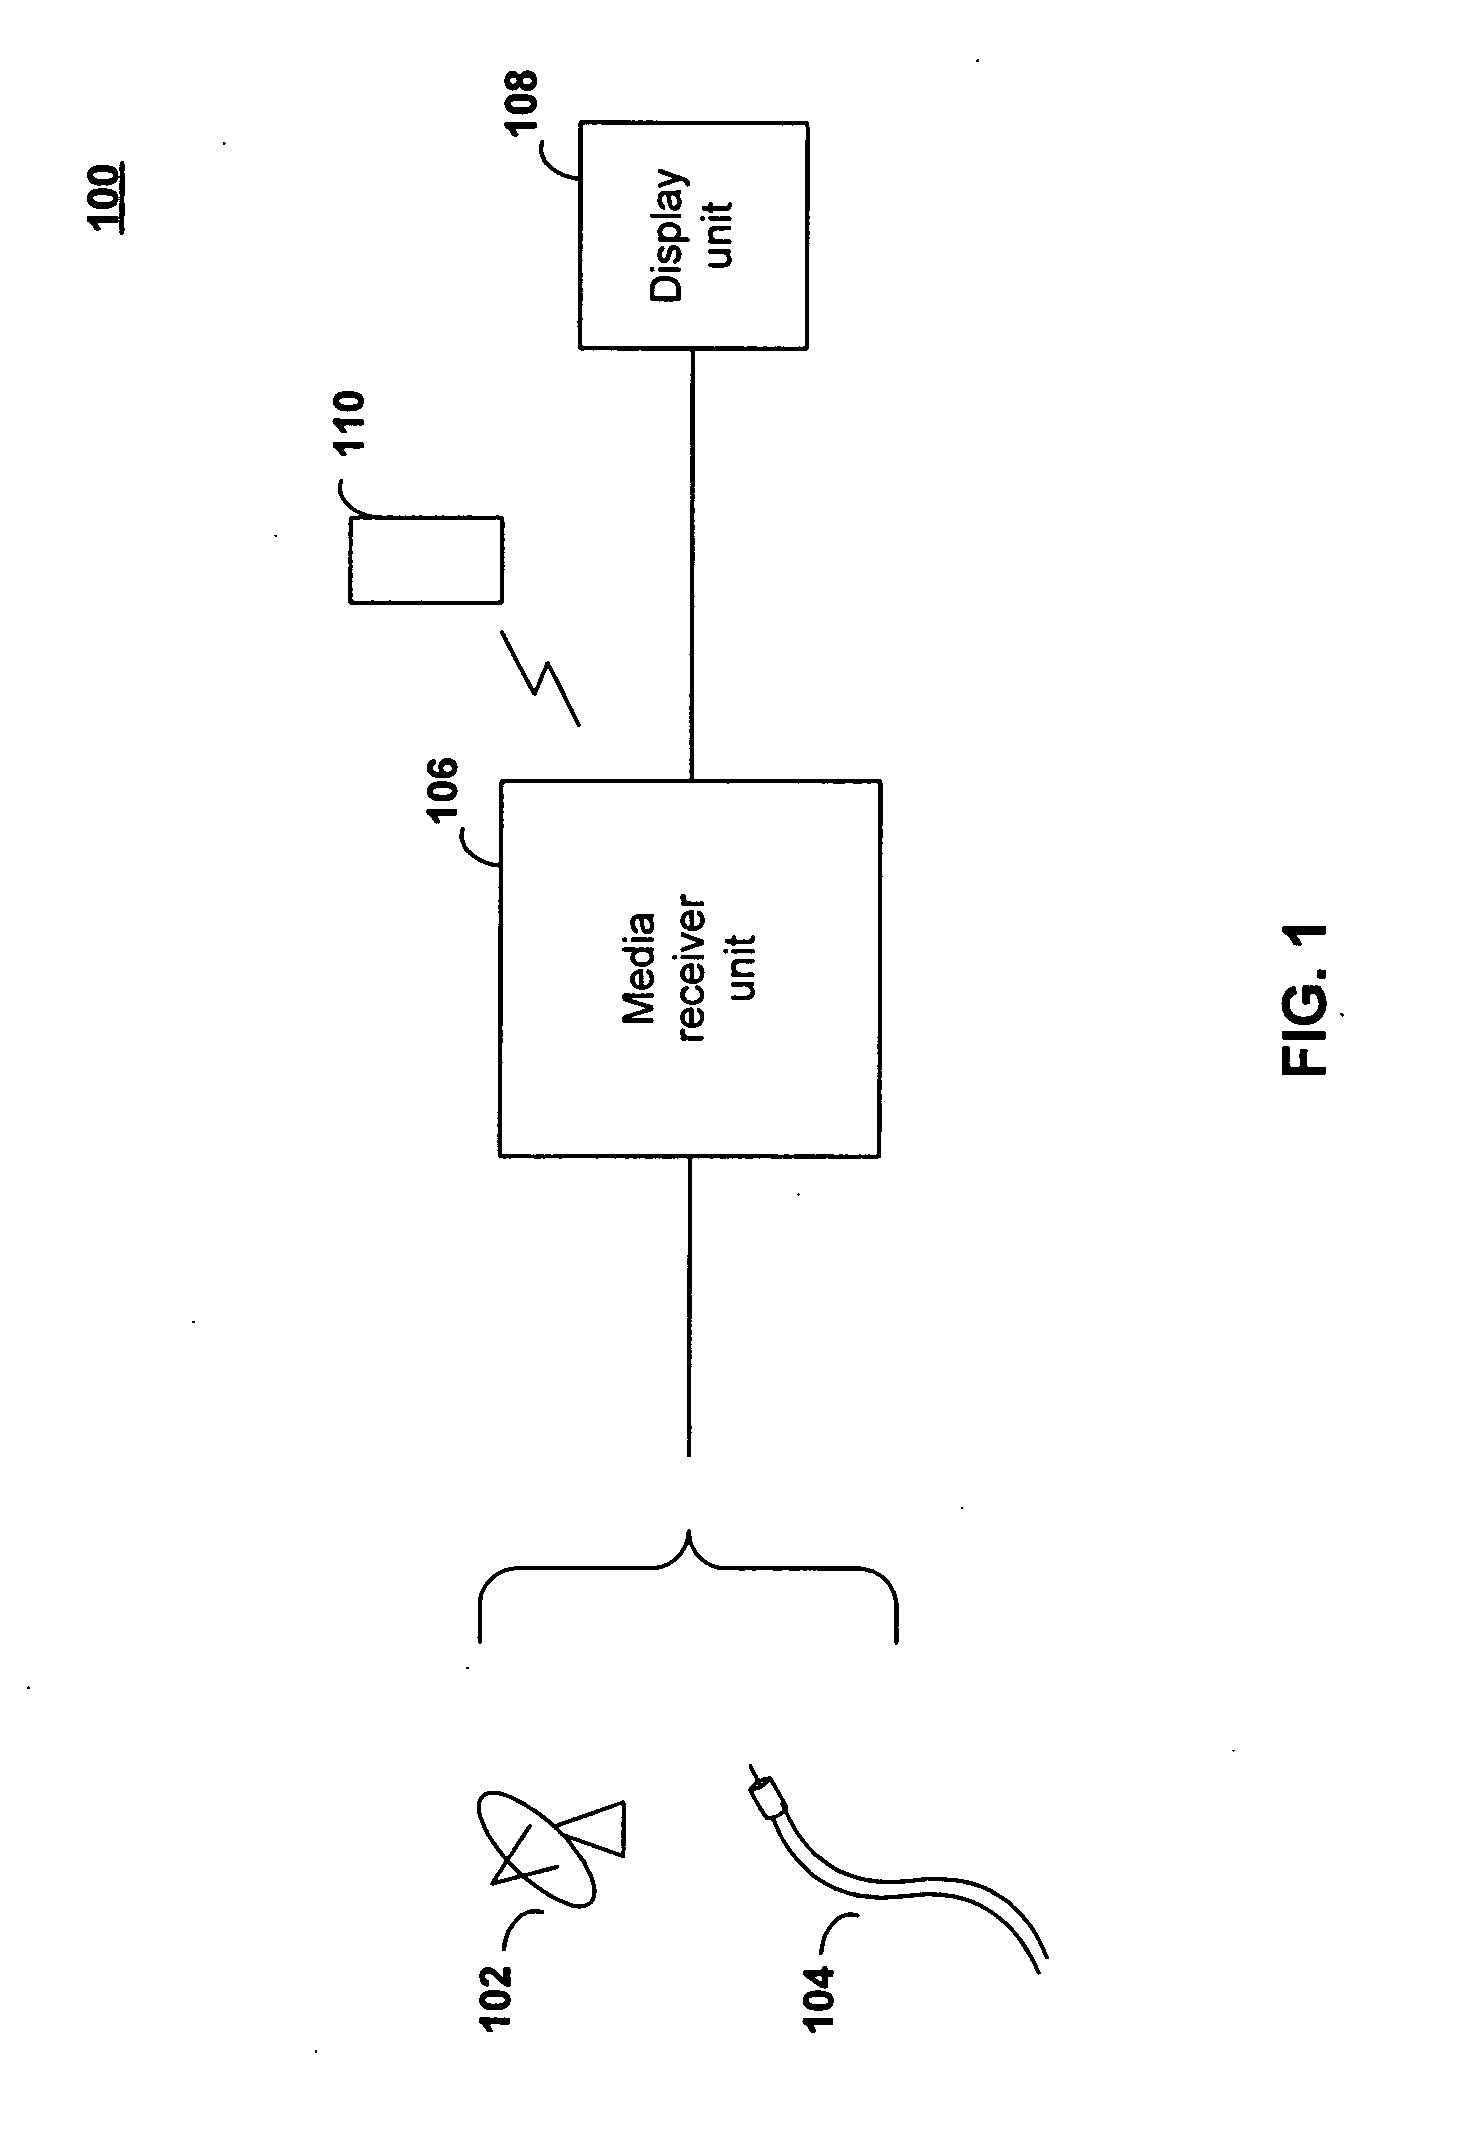 Method and system for providing faster channel switching in a digital broadcast system